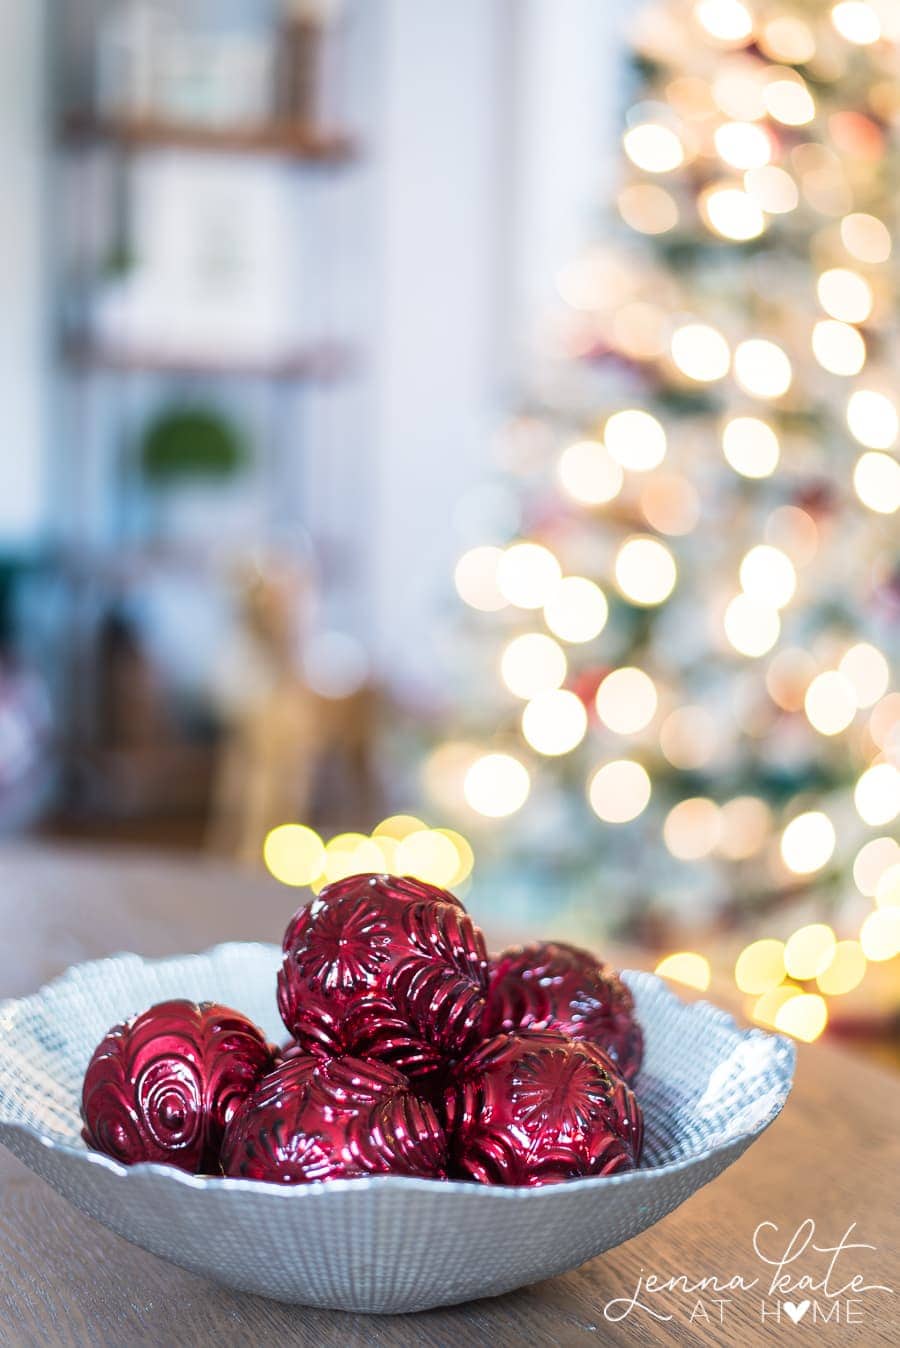 Textured burgundy ornaments in a bowl on the coffee table, with the lit Christmas tree in the background